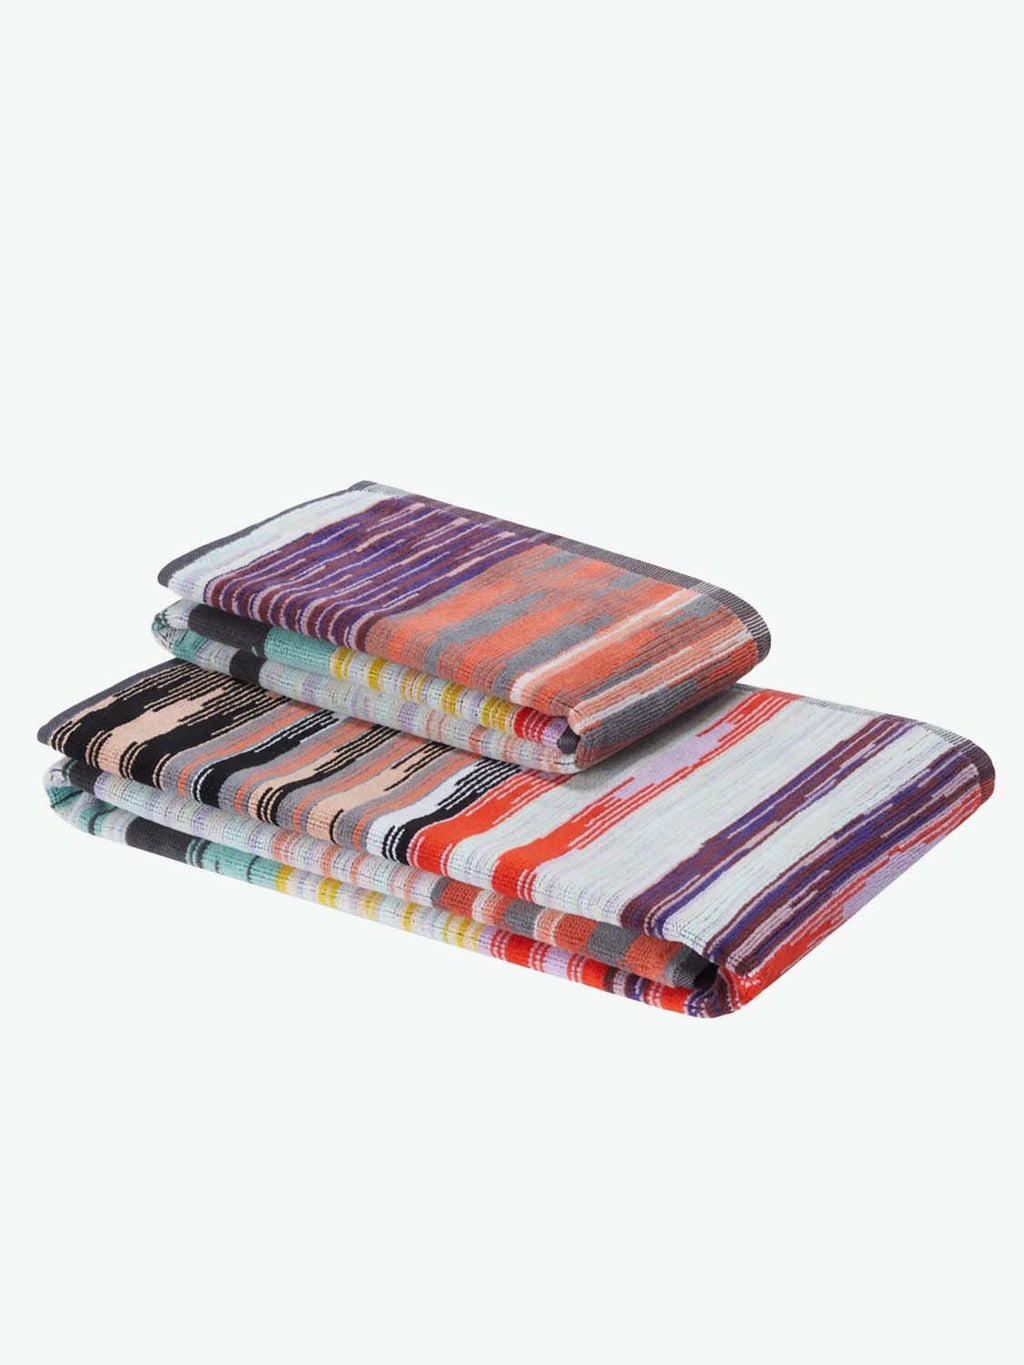 Missoni Home Minuetto Two Piece Bath and Hand Towel Set